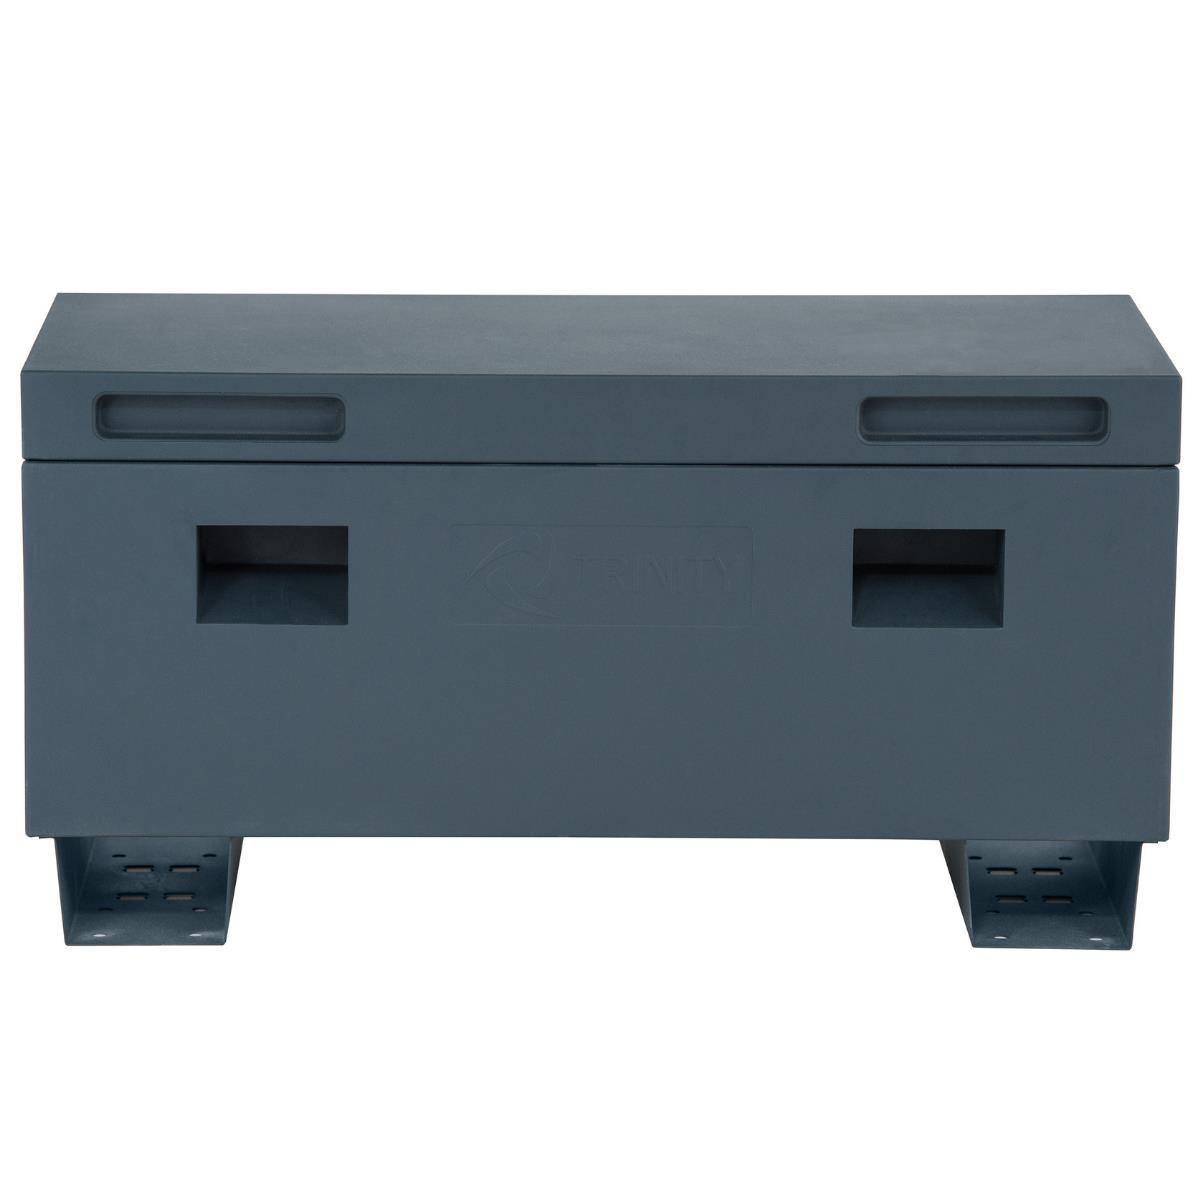 Picture of Trinity TXKPGR-0502 36 in. Matte Rust-Resistant Powder Coated Job Site Box